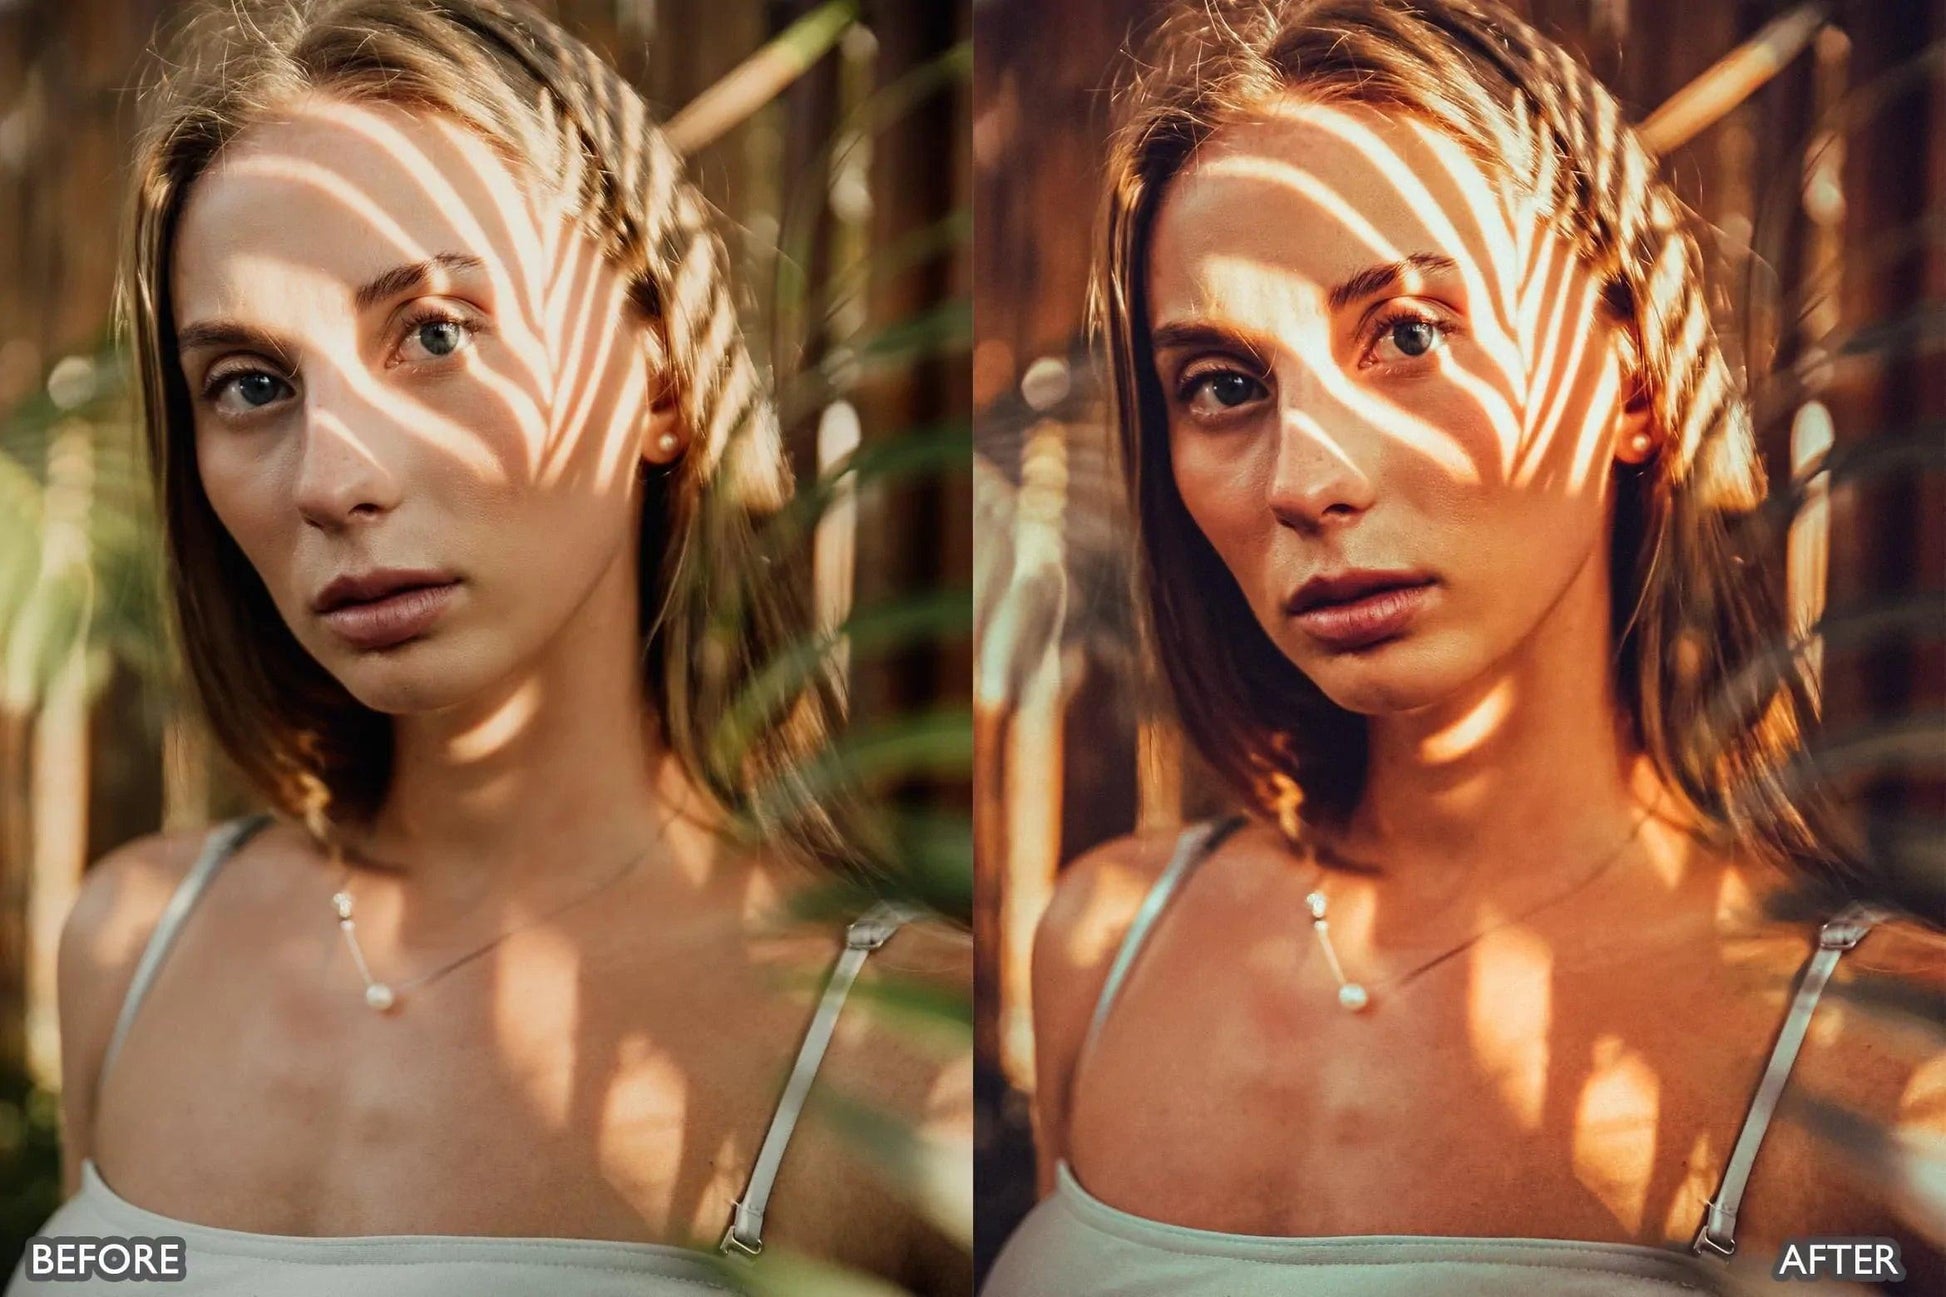 Bohemian Cinematic Film Lightroom Presets - adobe lightroom presets, brown presets, Cinematic Presets, instagram presets, lightroom presets, Portrait presets, presets before and after, professional lightroom presets, summer presets, Warm Golden presets - aaapresets.com